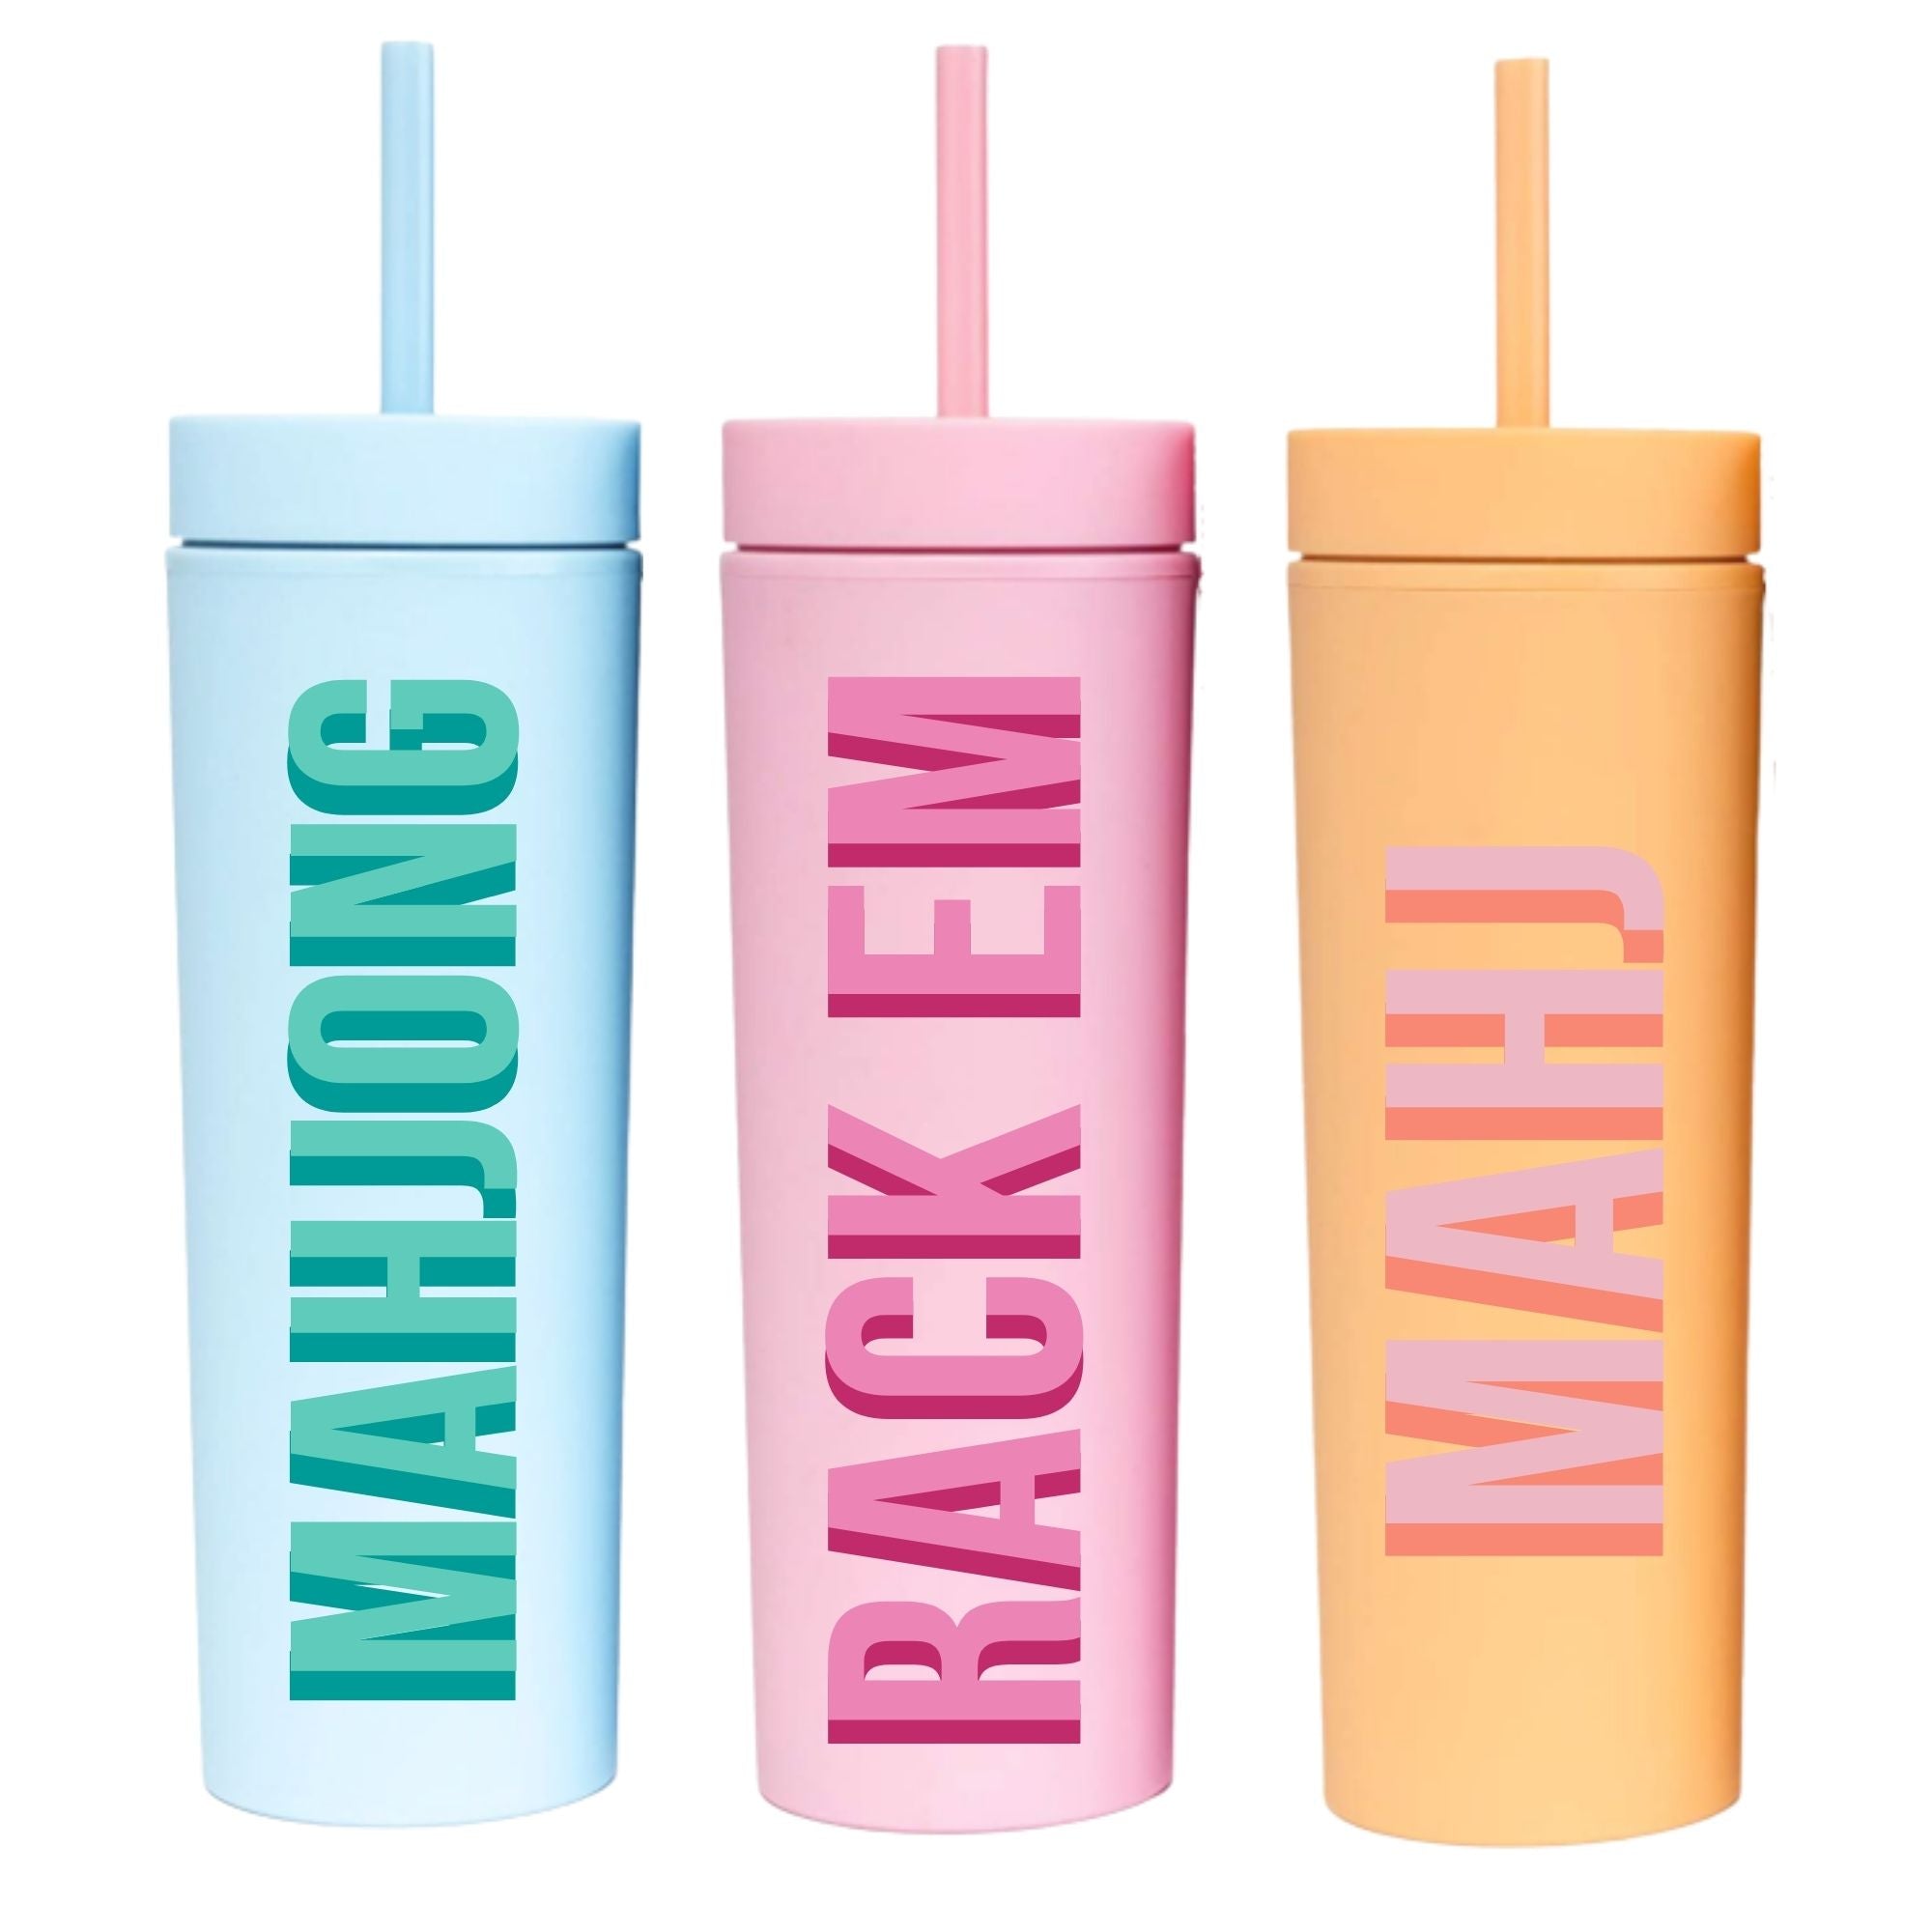 Three Mahjong themed tumblers in blue, pink, and orange